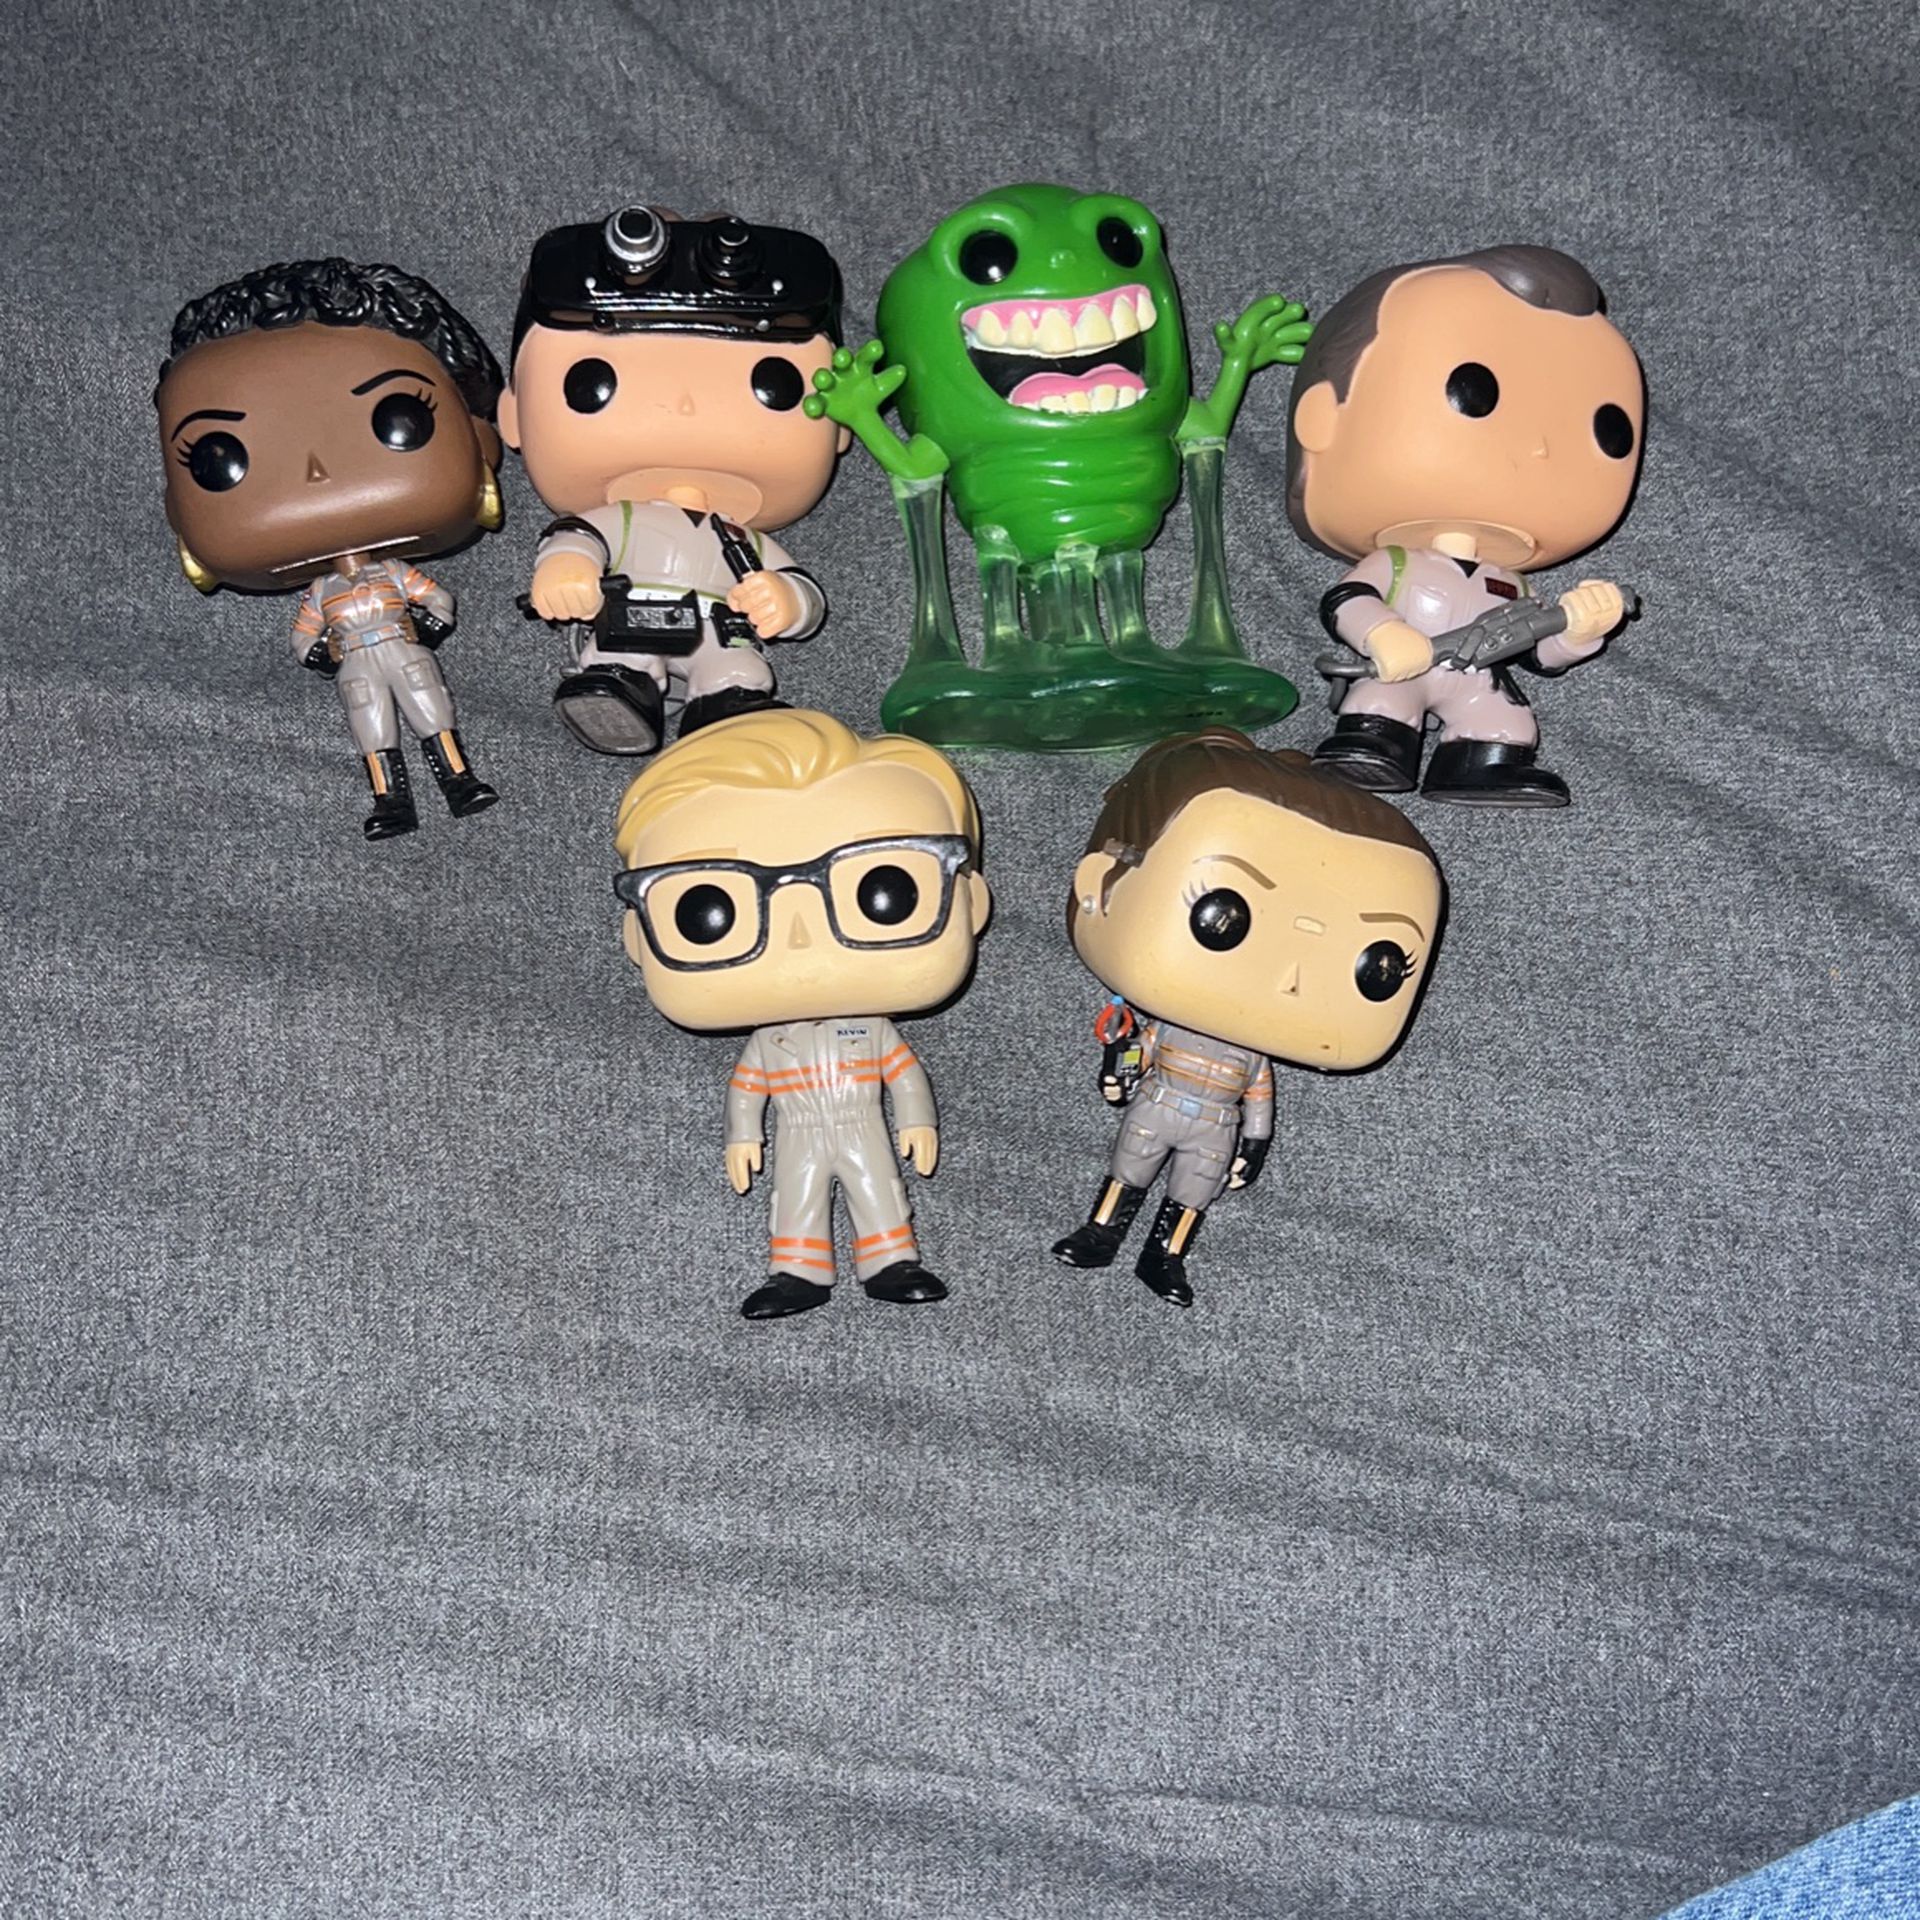 GHOST BUSTERS FUNKOS 